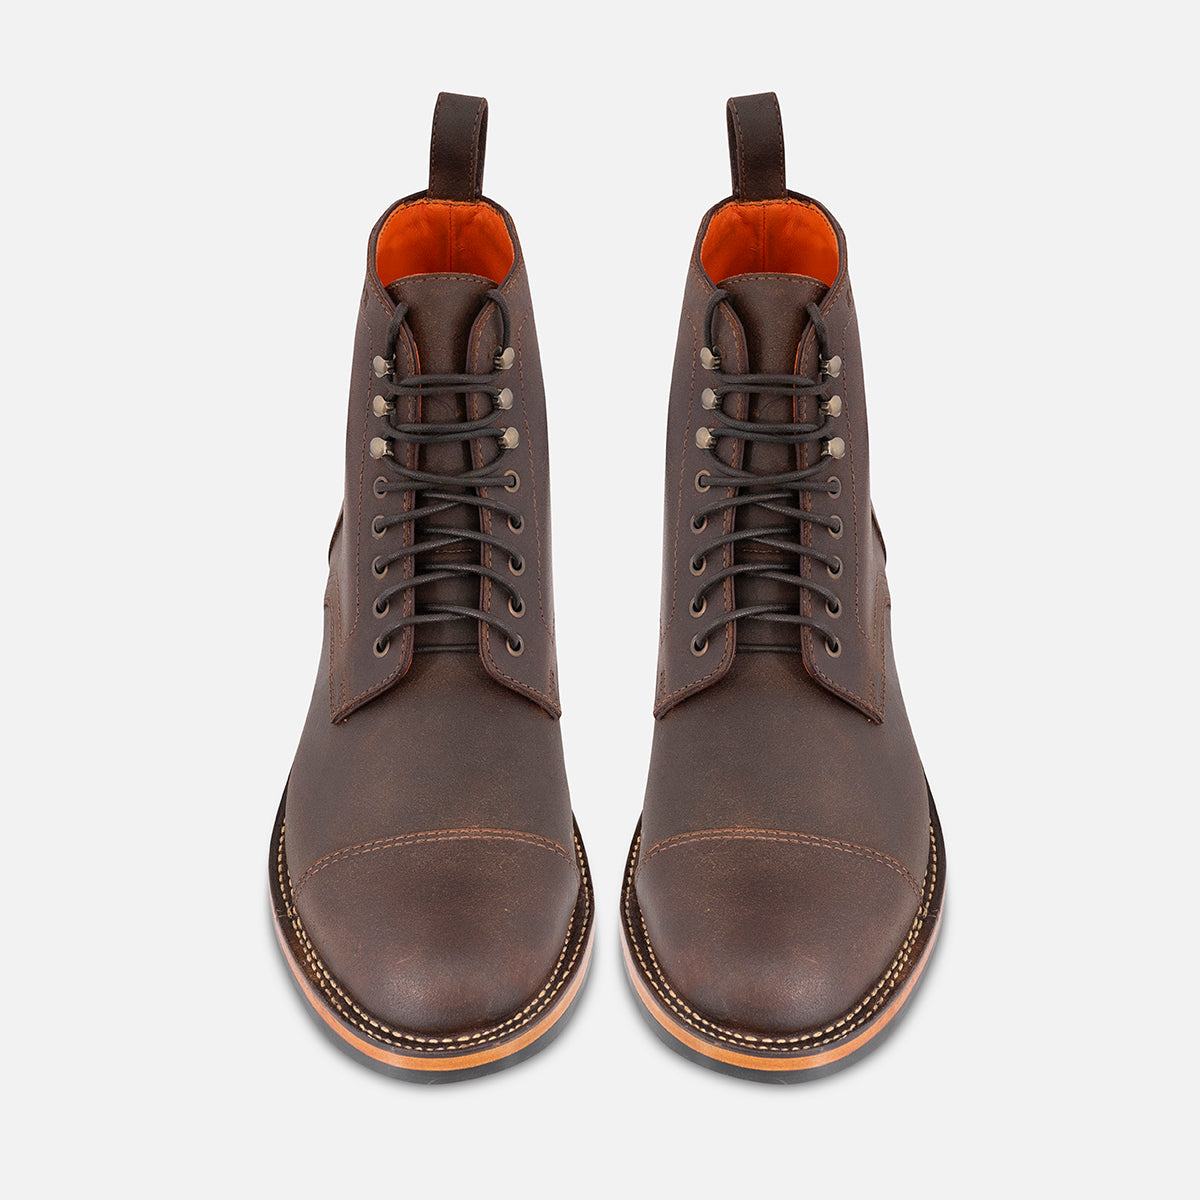 Jumper waxed med brown boot